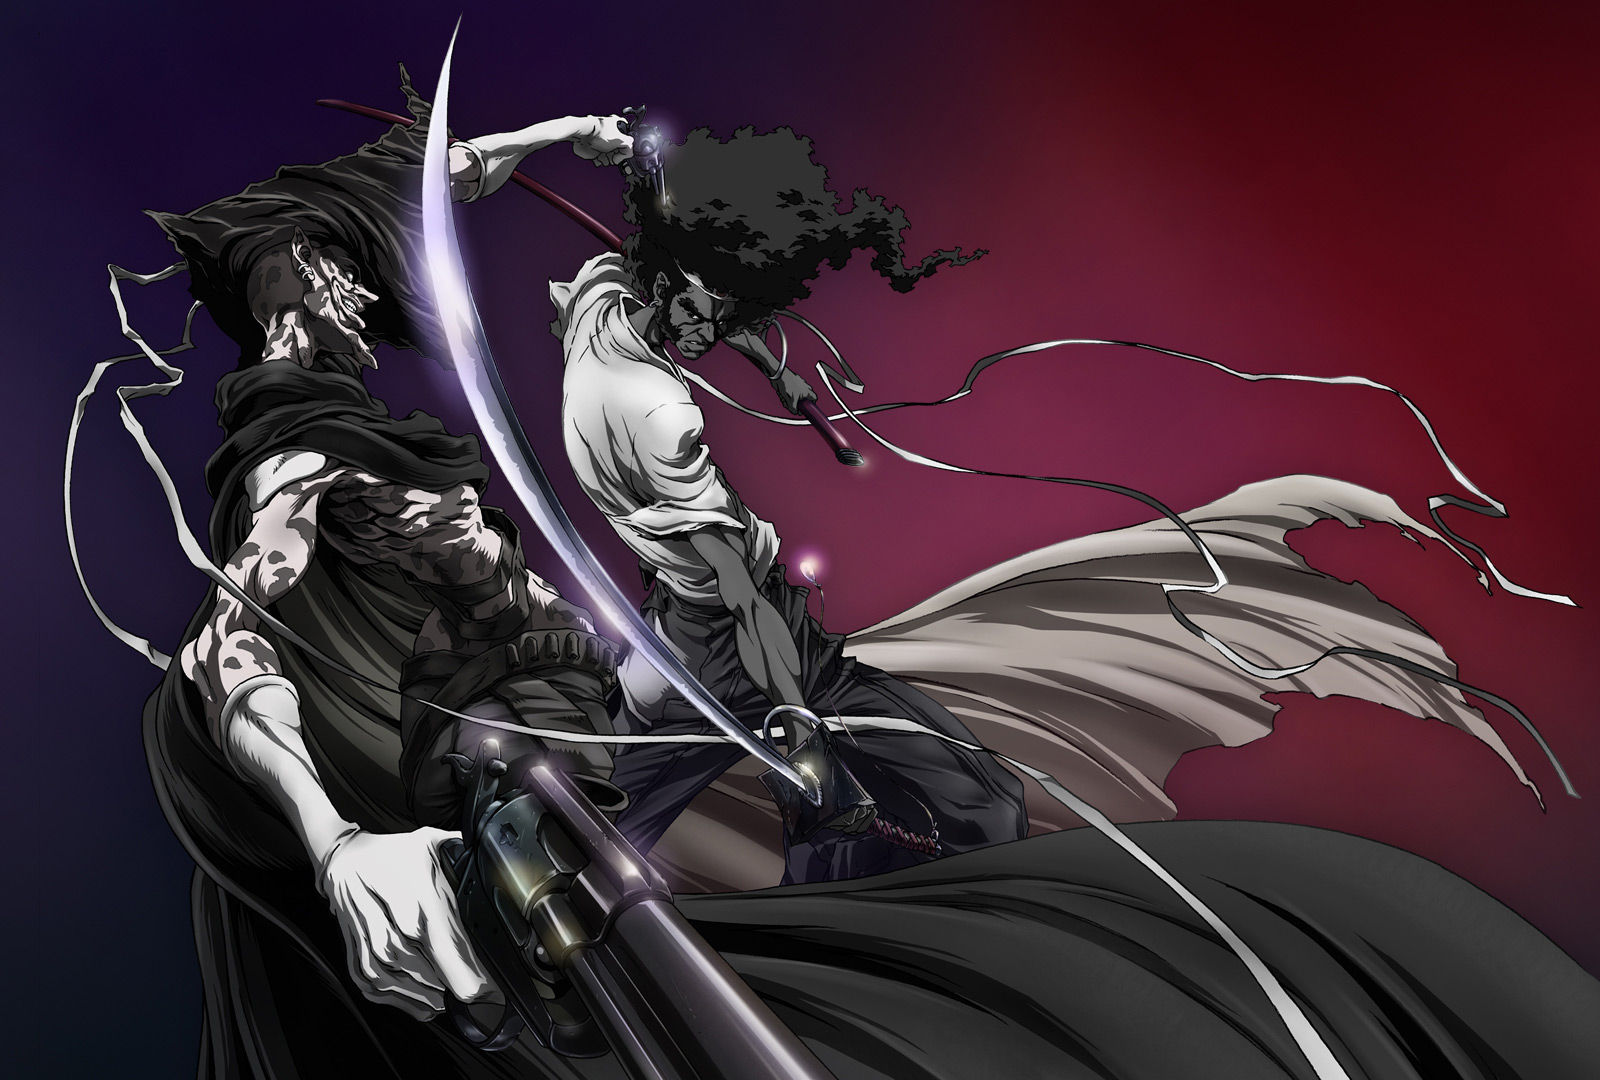 Anime character with an Afro Samurai hairstyle on a colorful desktop wallpaper.